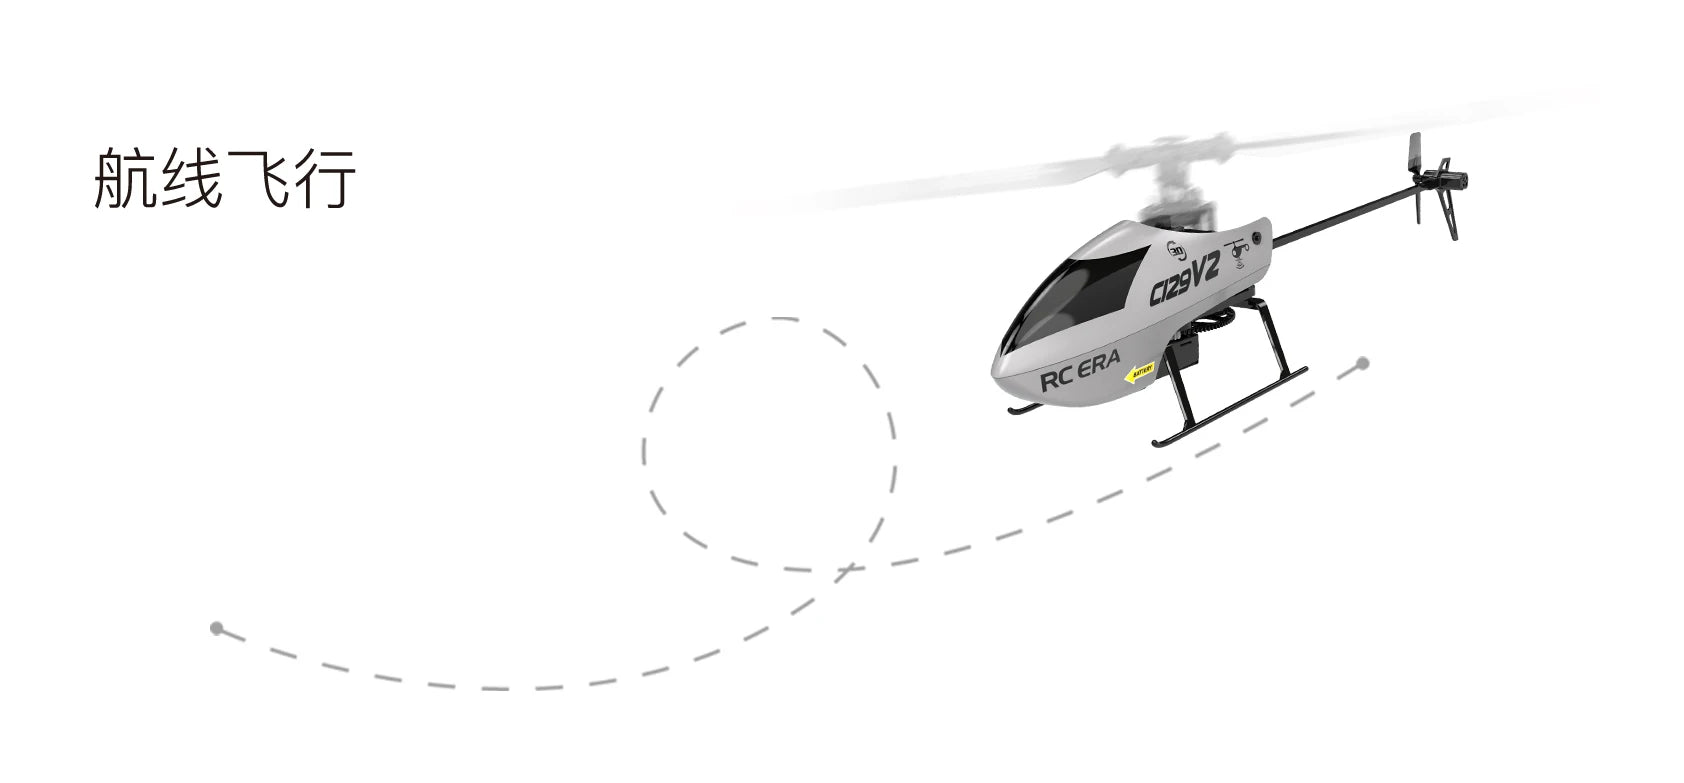 C129 V2 RC Helicopter, traditional helicopters' flight time is generally about 7 minutes, without fixed height 